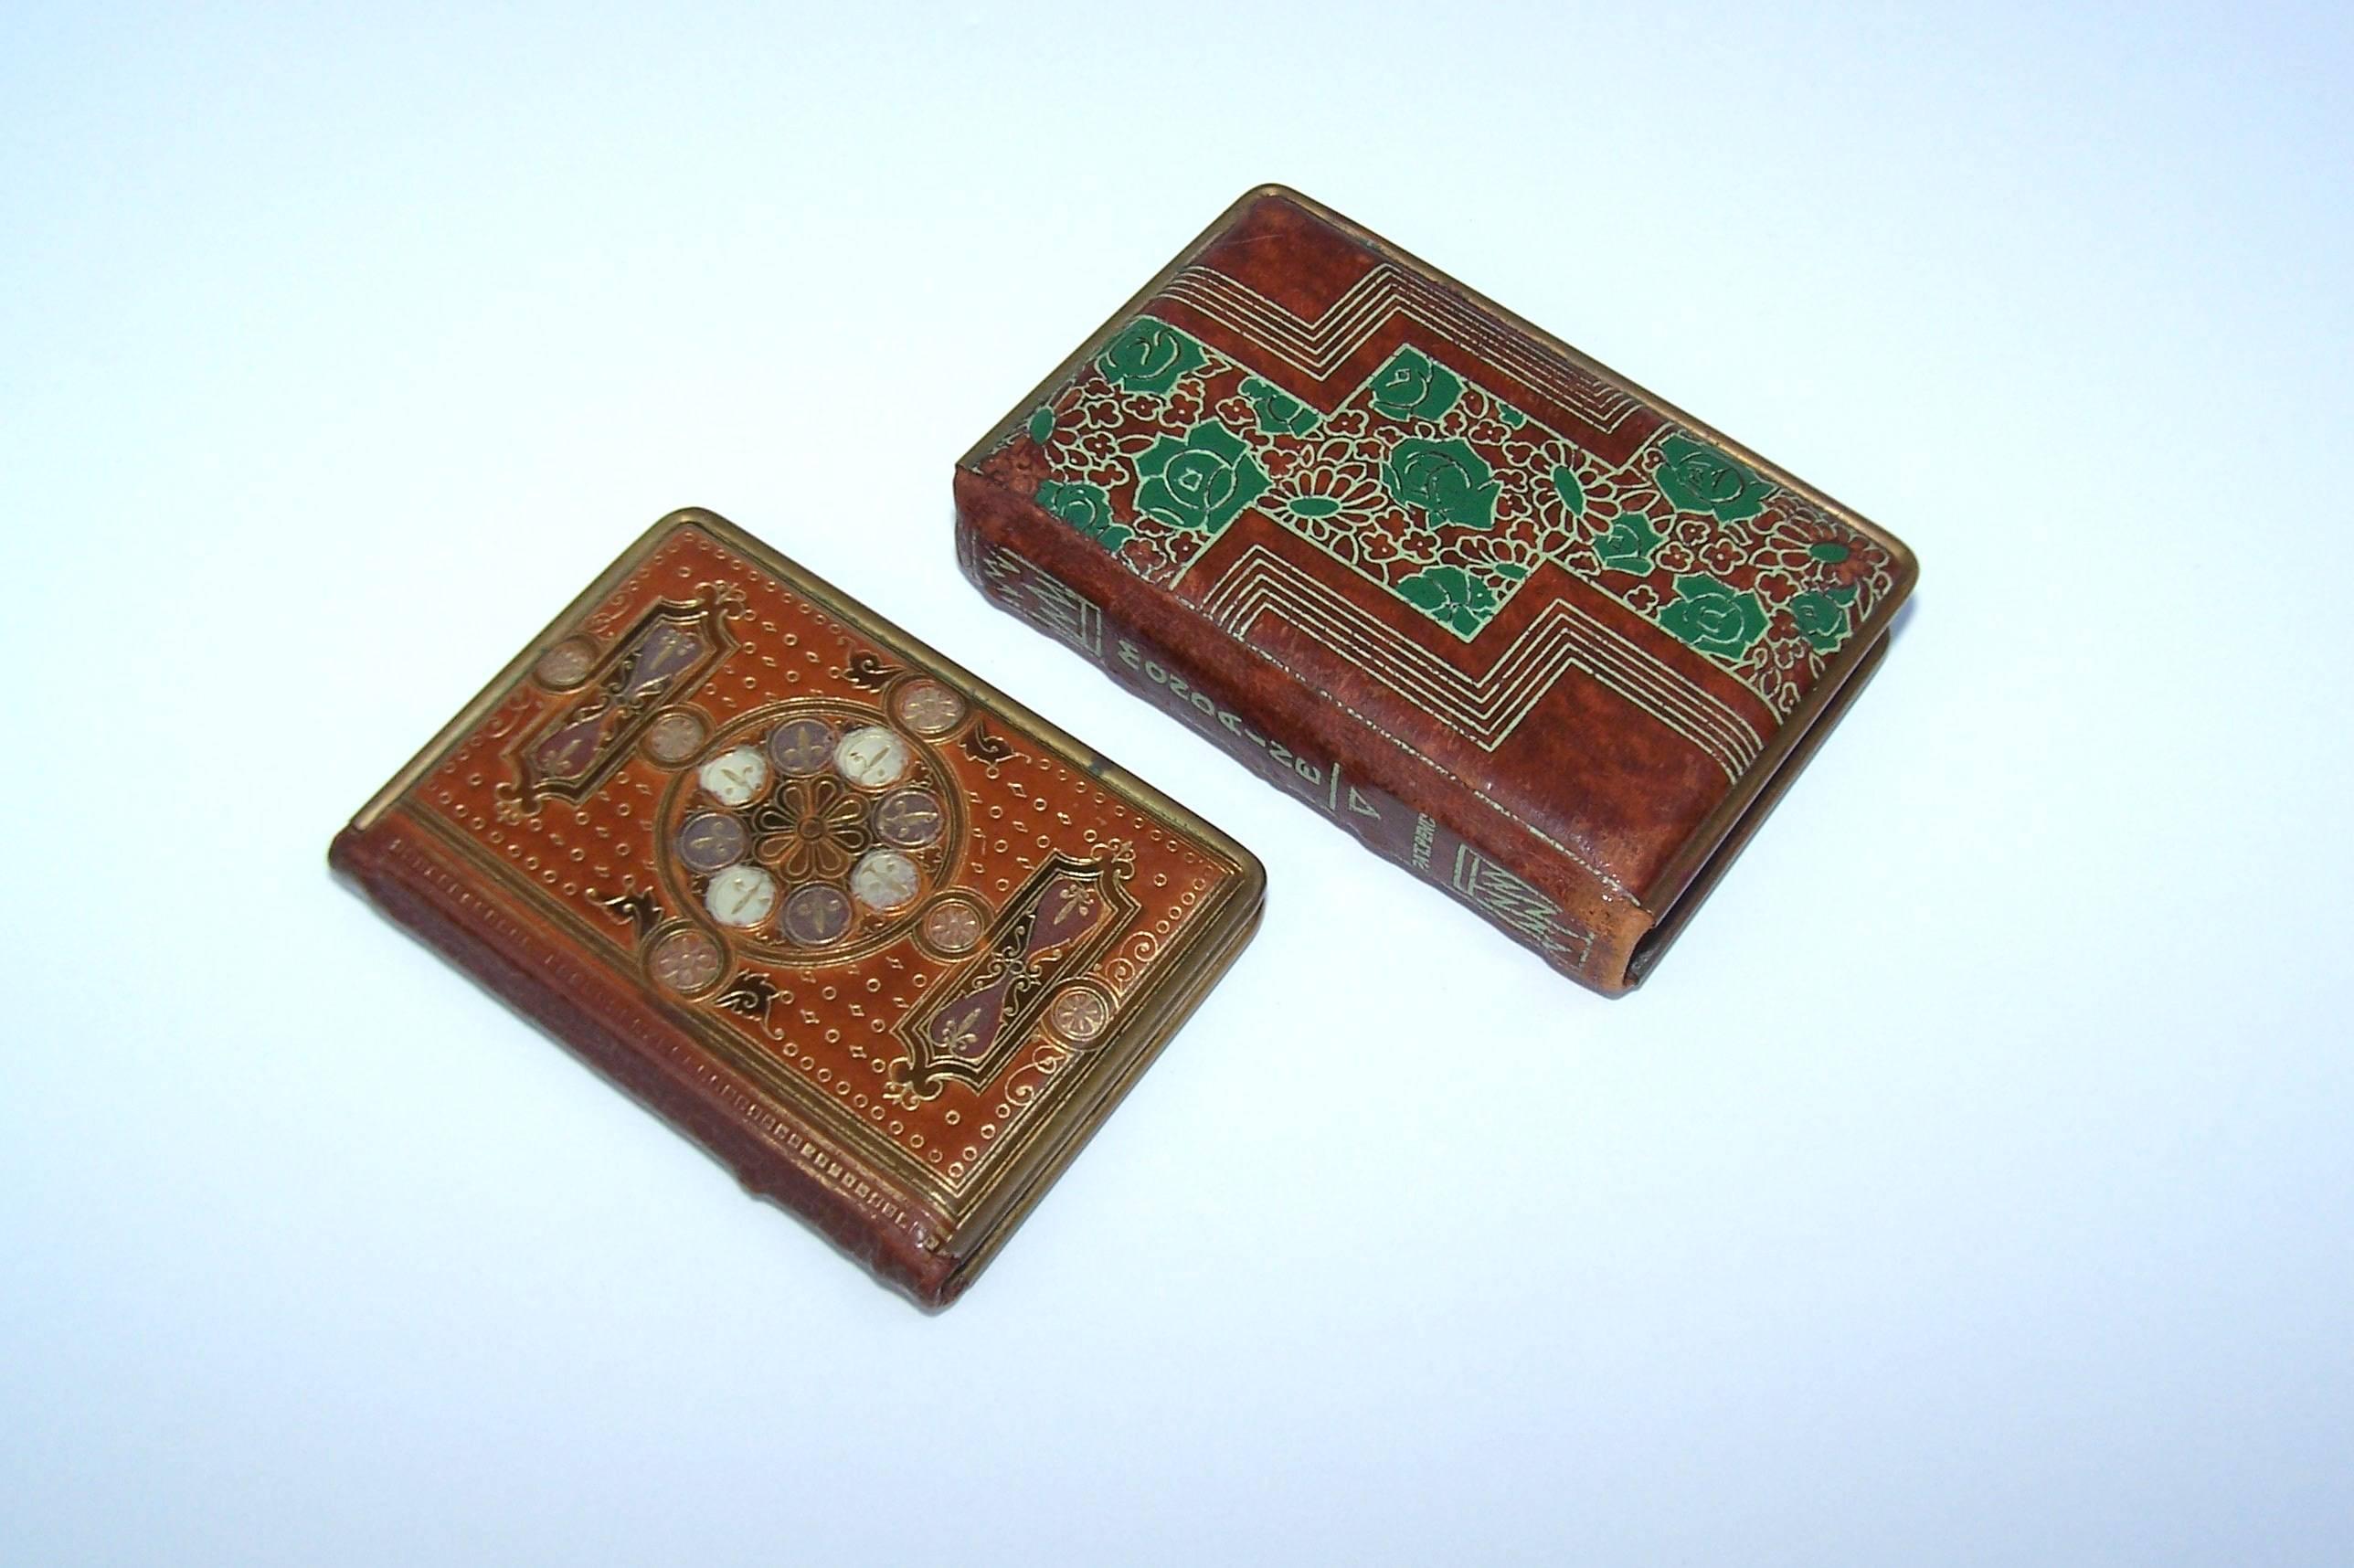 These charming tooled leather powder compacts by Mondaine of New York are made to resemble miniature leather bound books.  The larger one measures 3